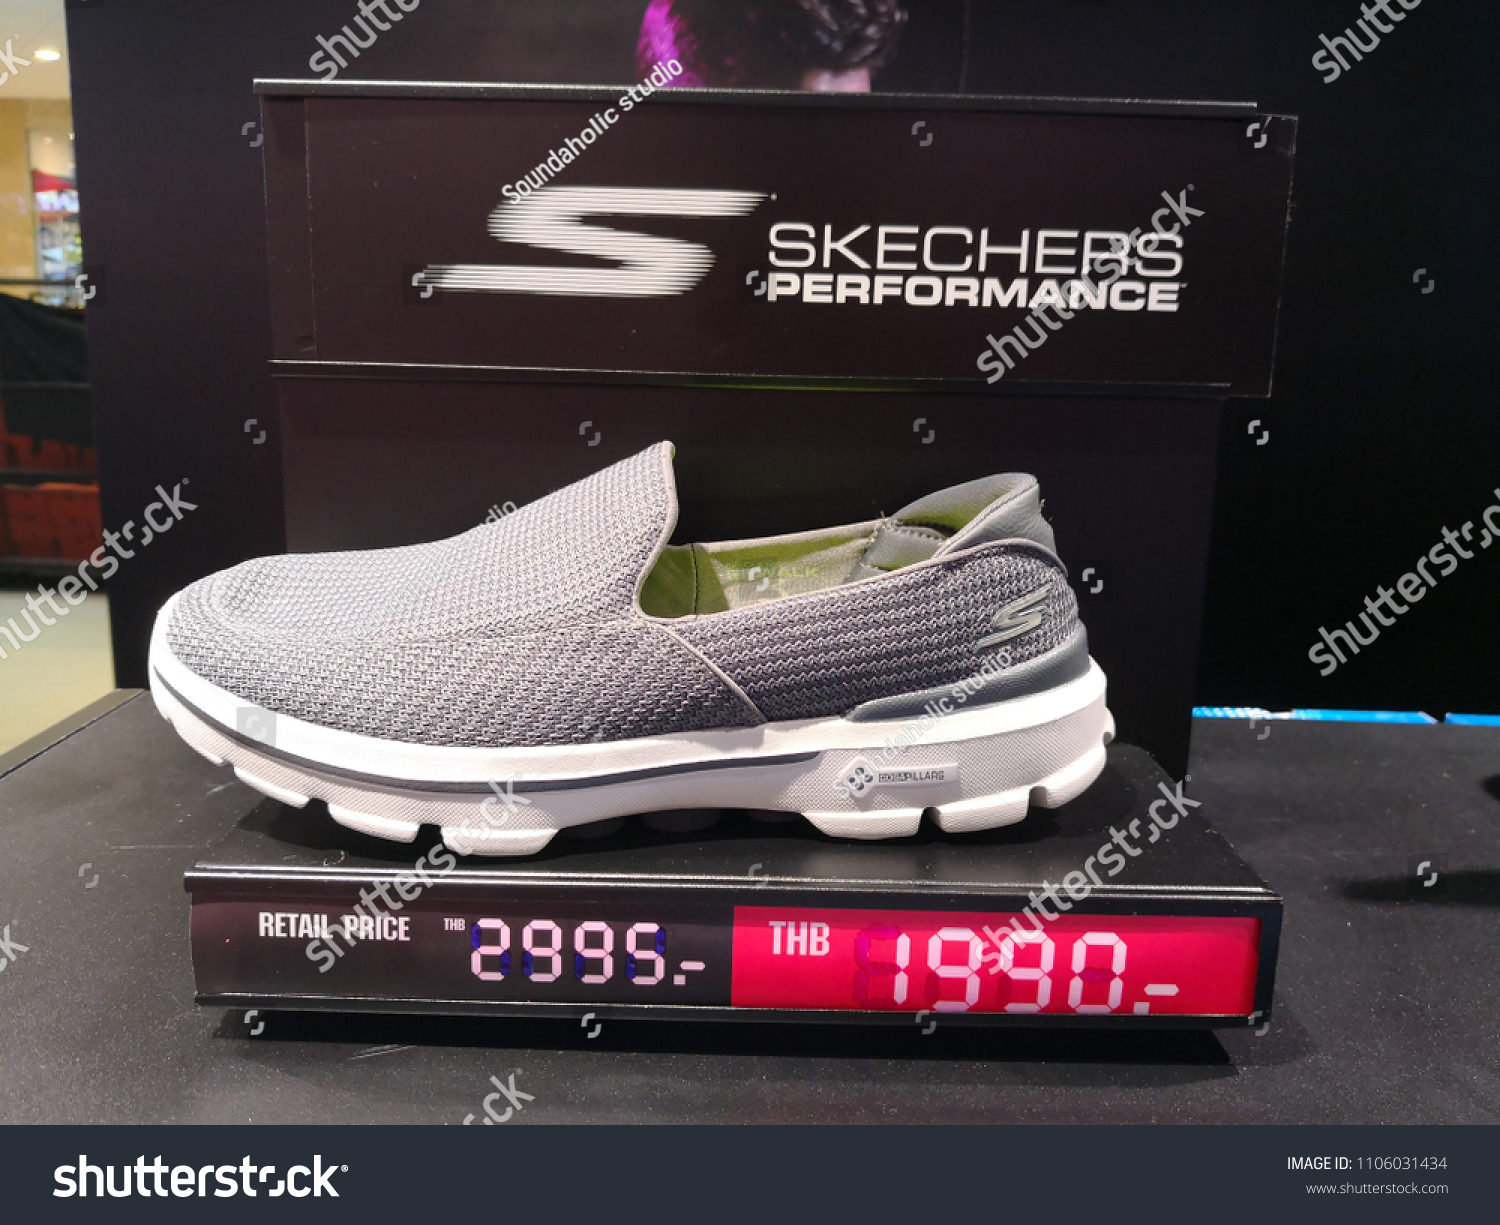 skechers coupons in store 2018